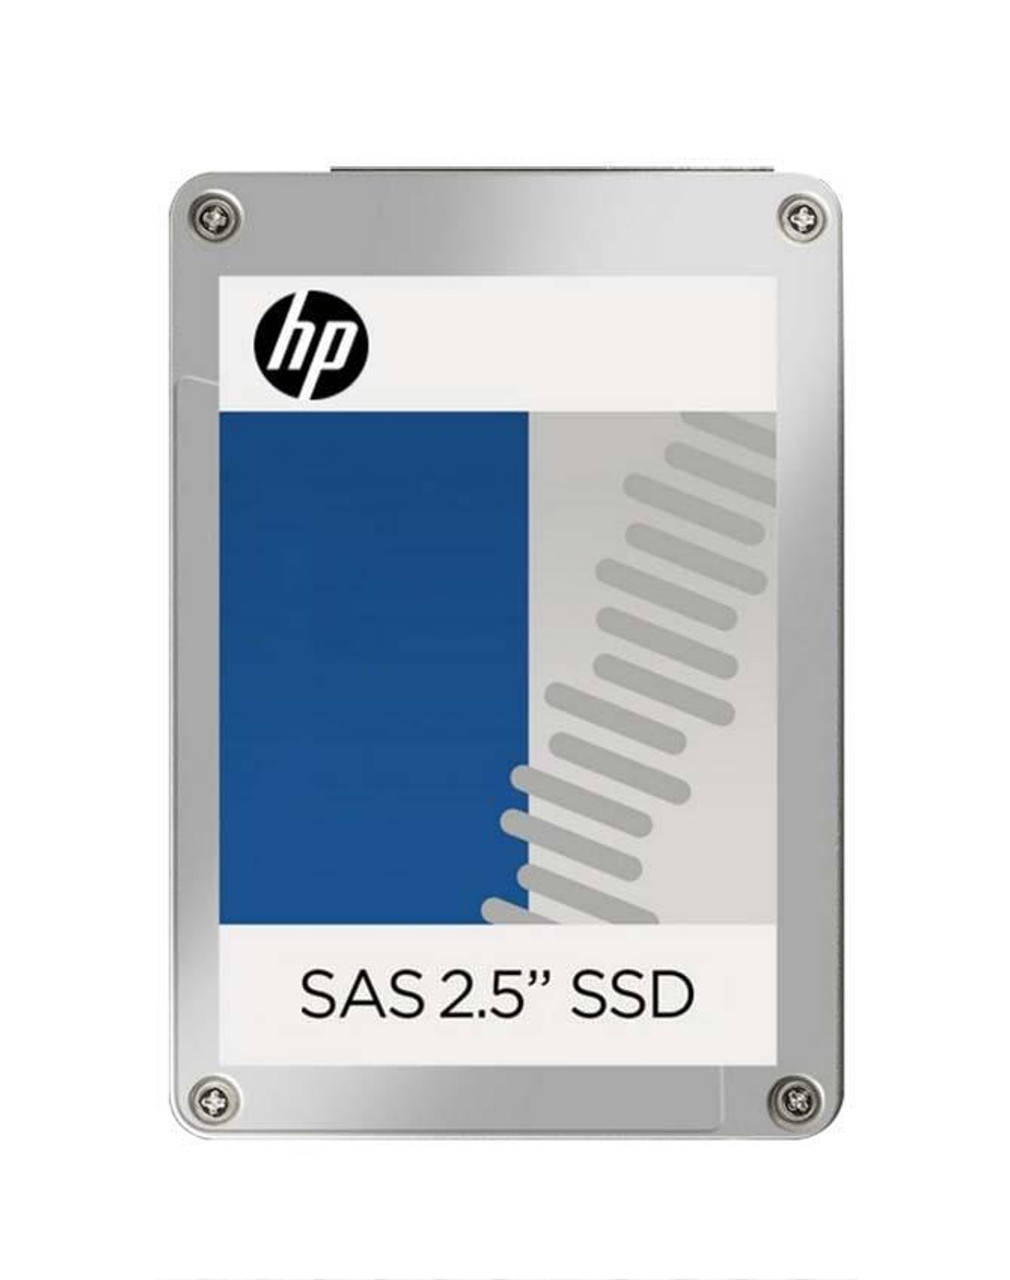 Q0F45A HPE 7.68TB SAS (FIPS) 2.5-inch Internal Solid State Drive (SSD) with Software for 3PAR StoreServ 9000